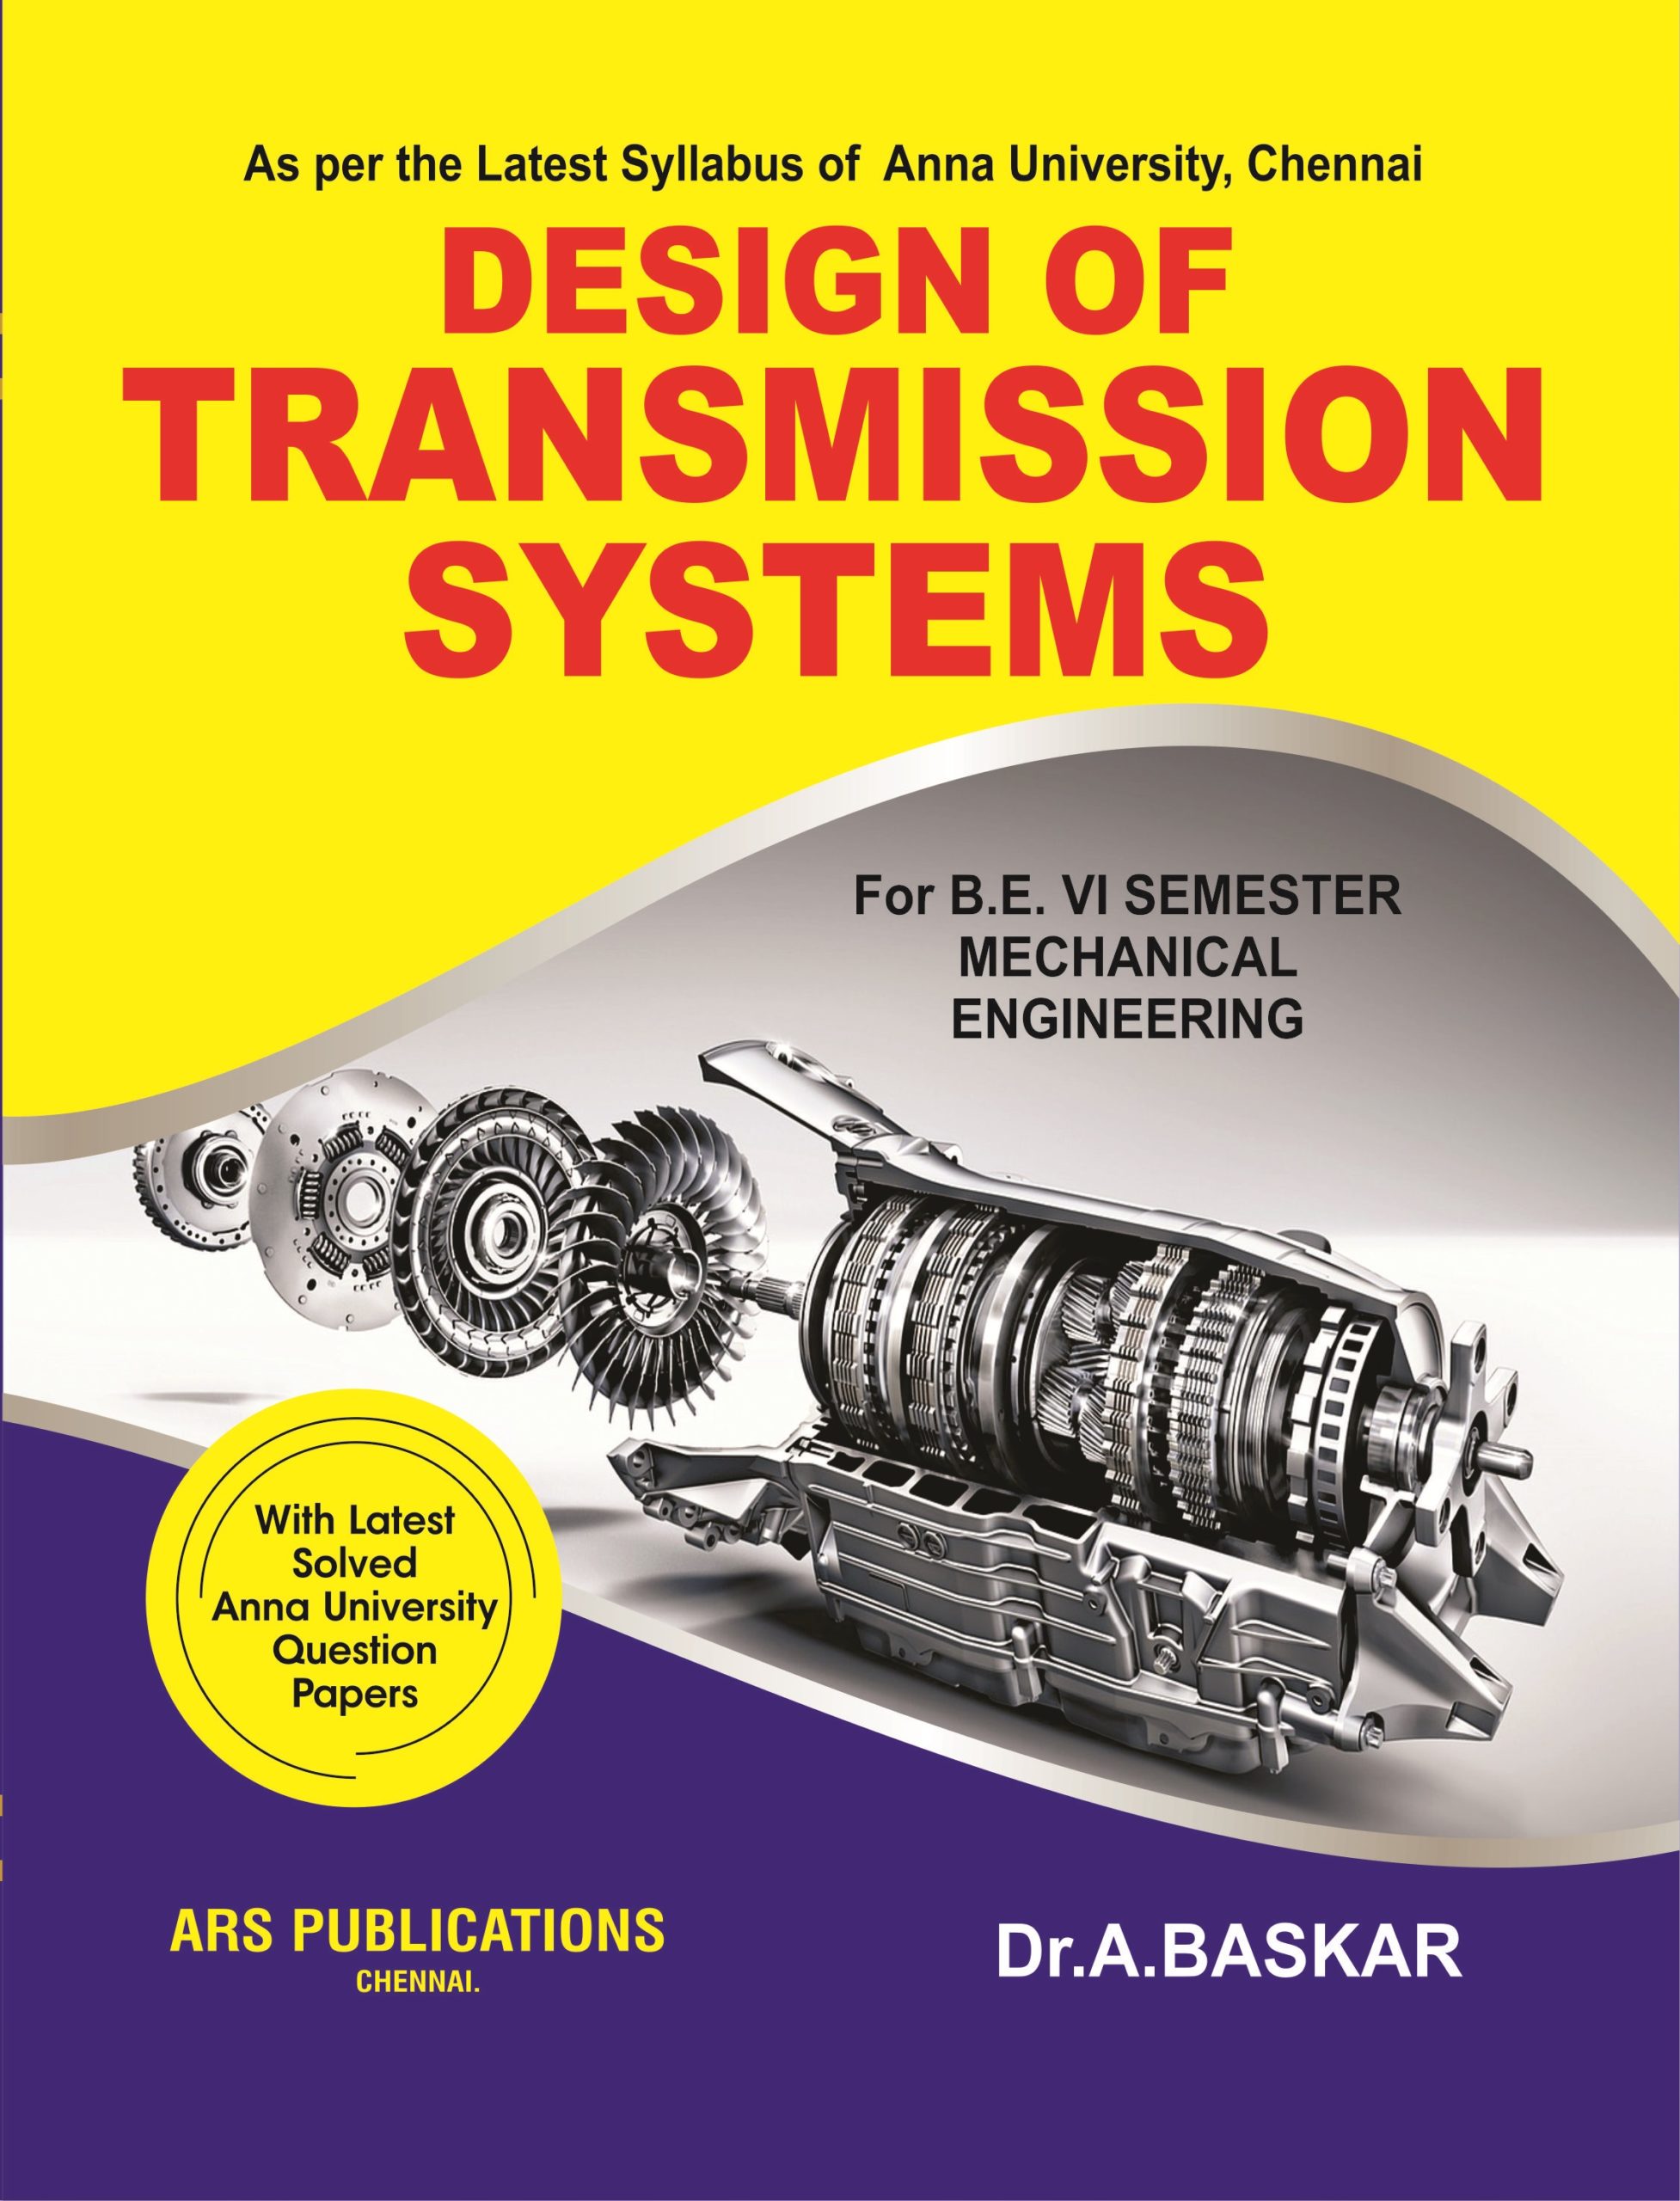 Design of transmission system lecture notes pdf example